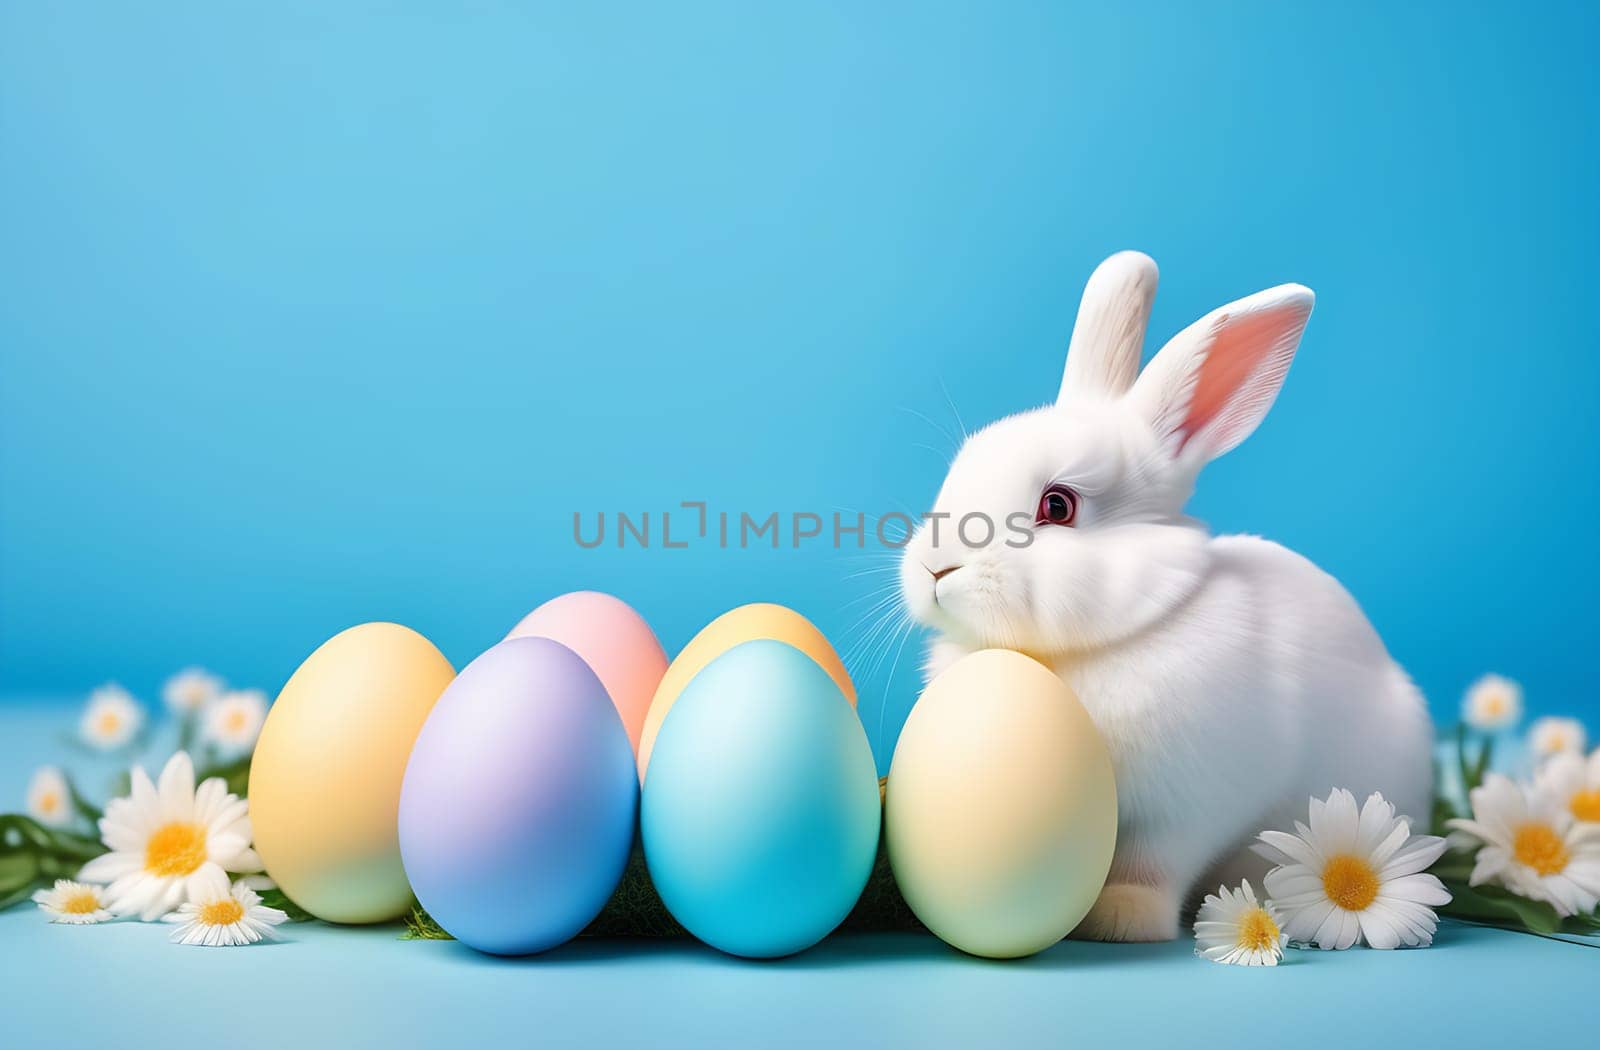 A small white fluffy rabbit sits near colorful Easter eggs and flowers on a blue background by claire_lucia